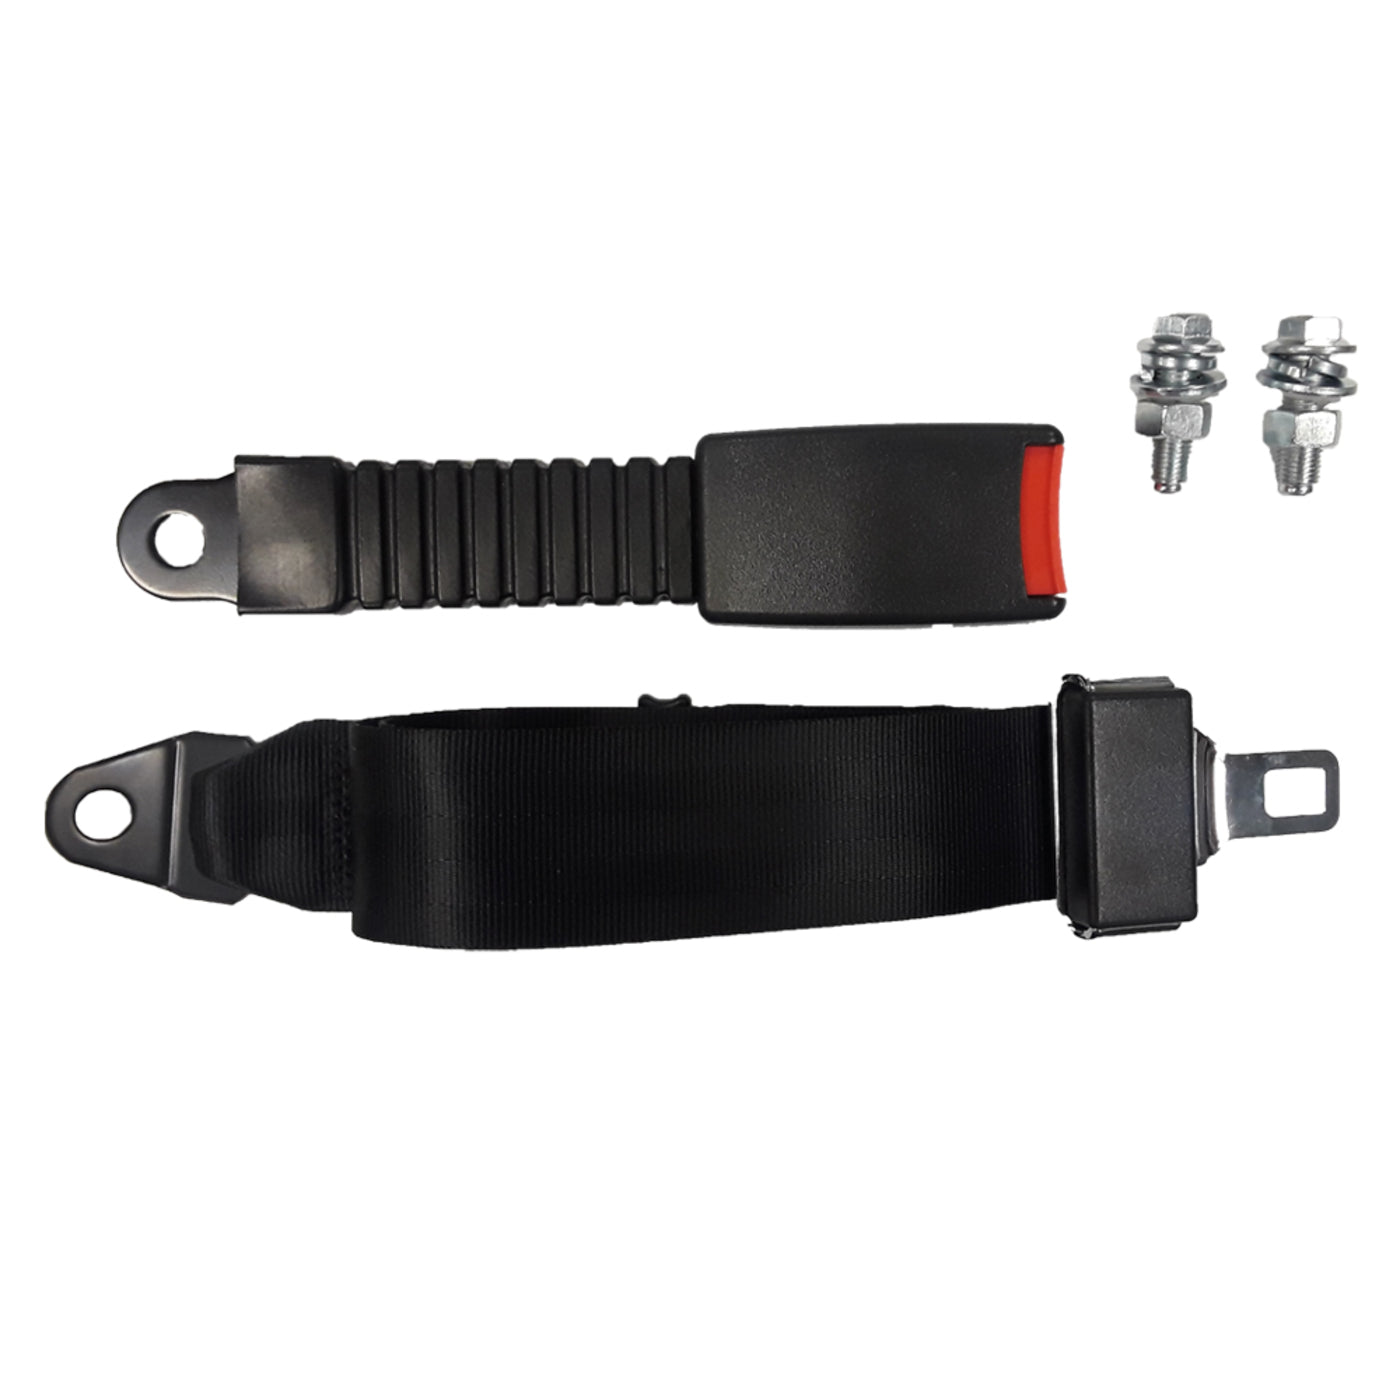 GTW 42.5 Inch Lap Belt with Rubber Over Mold Buckle